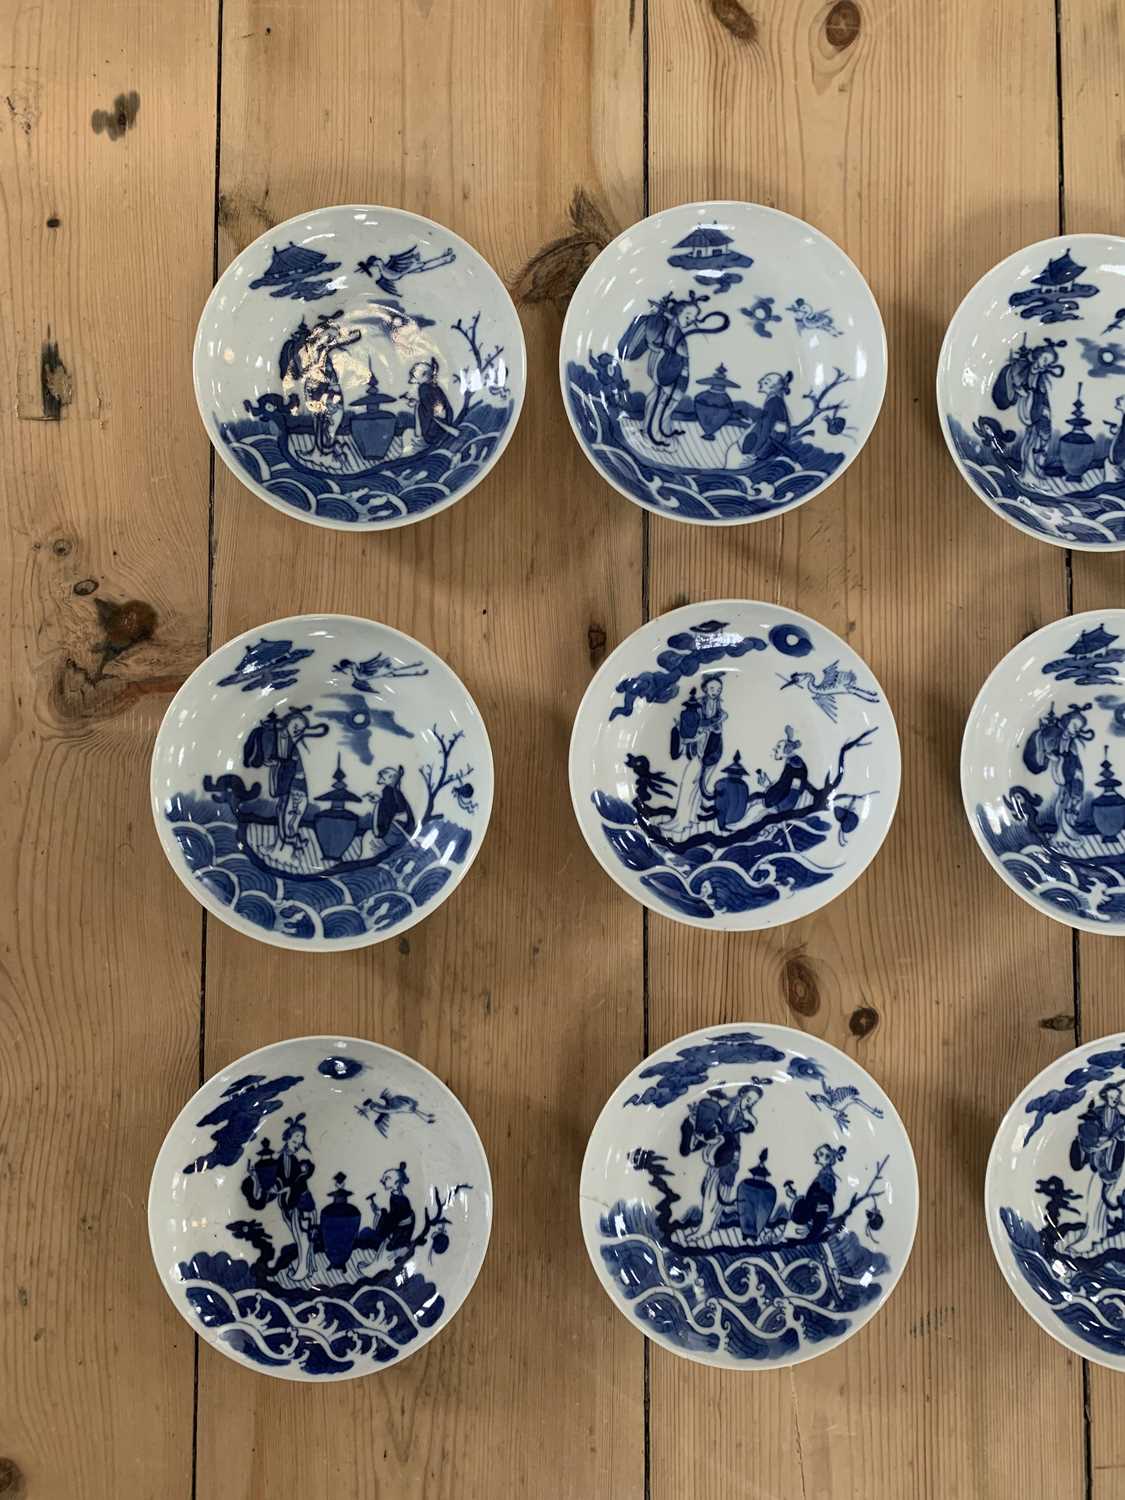 A set of Chinese blue and white porcelain cups, covers and stands, 18th century. - Image 21 of 41